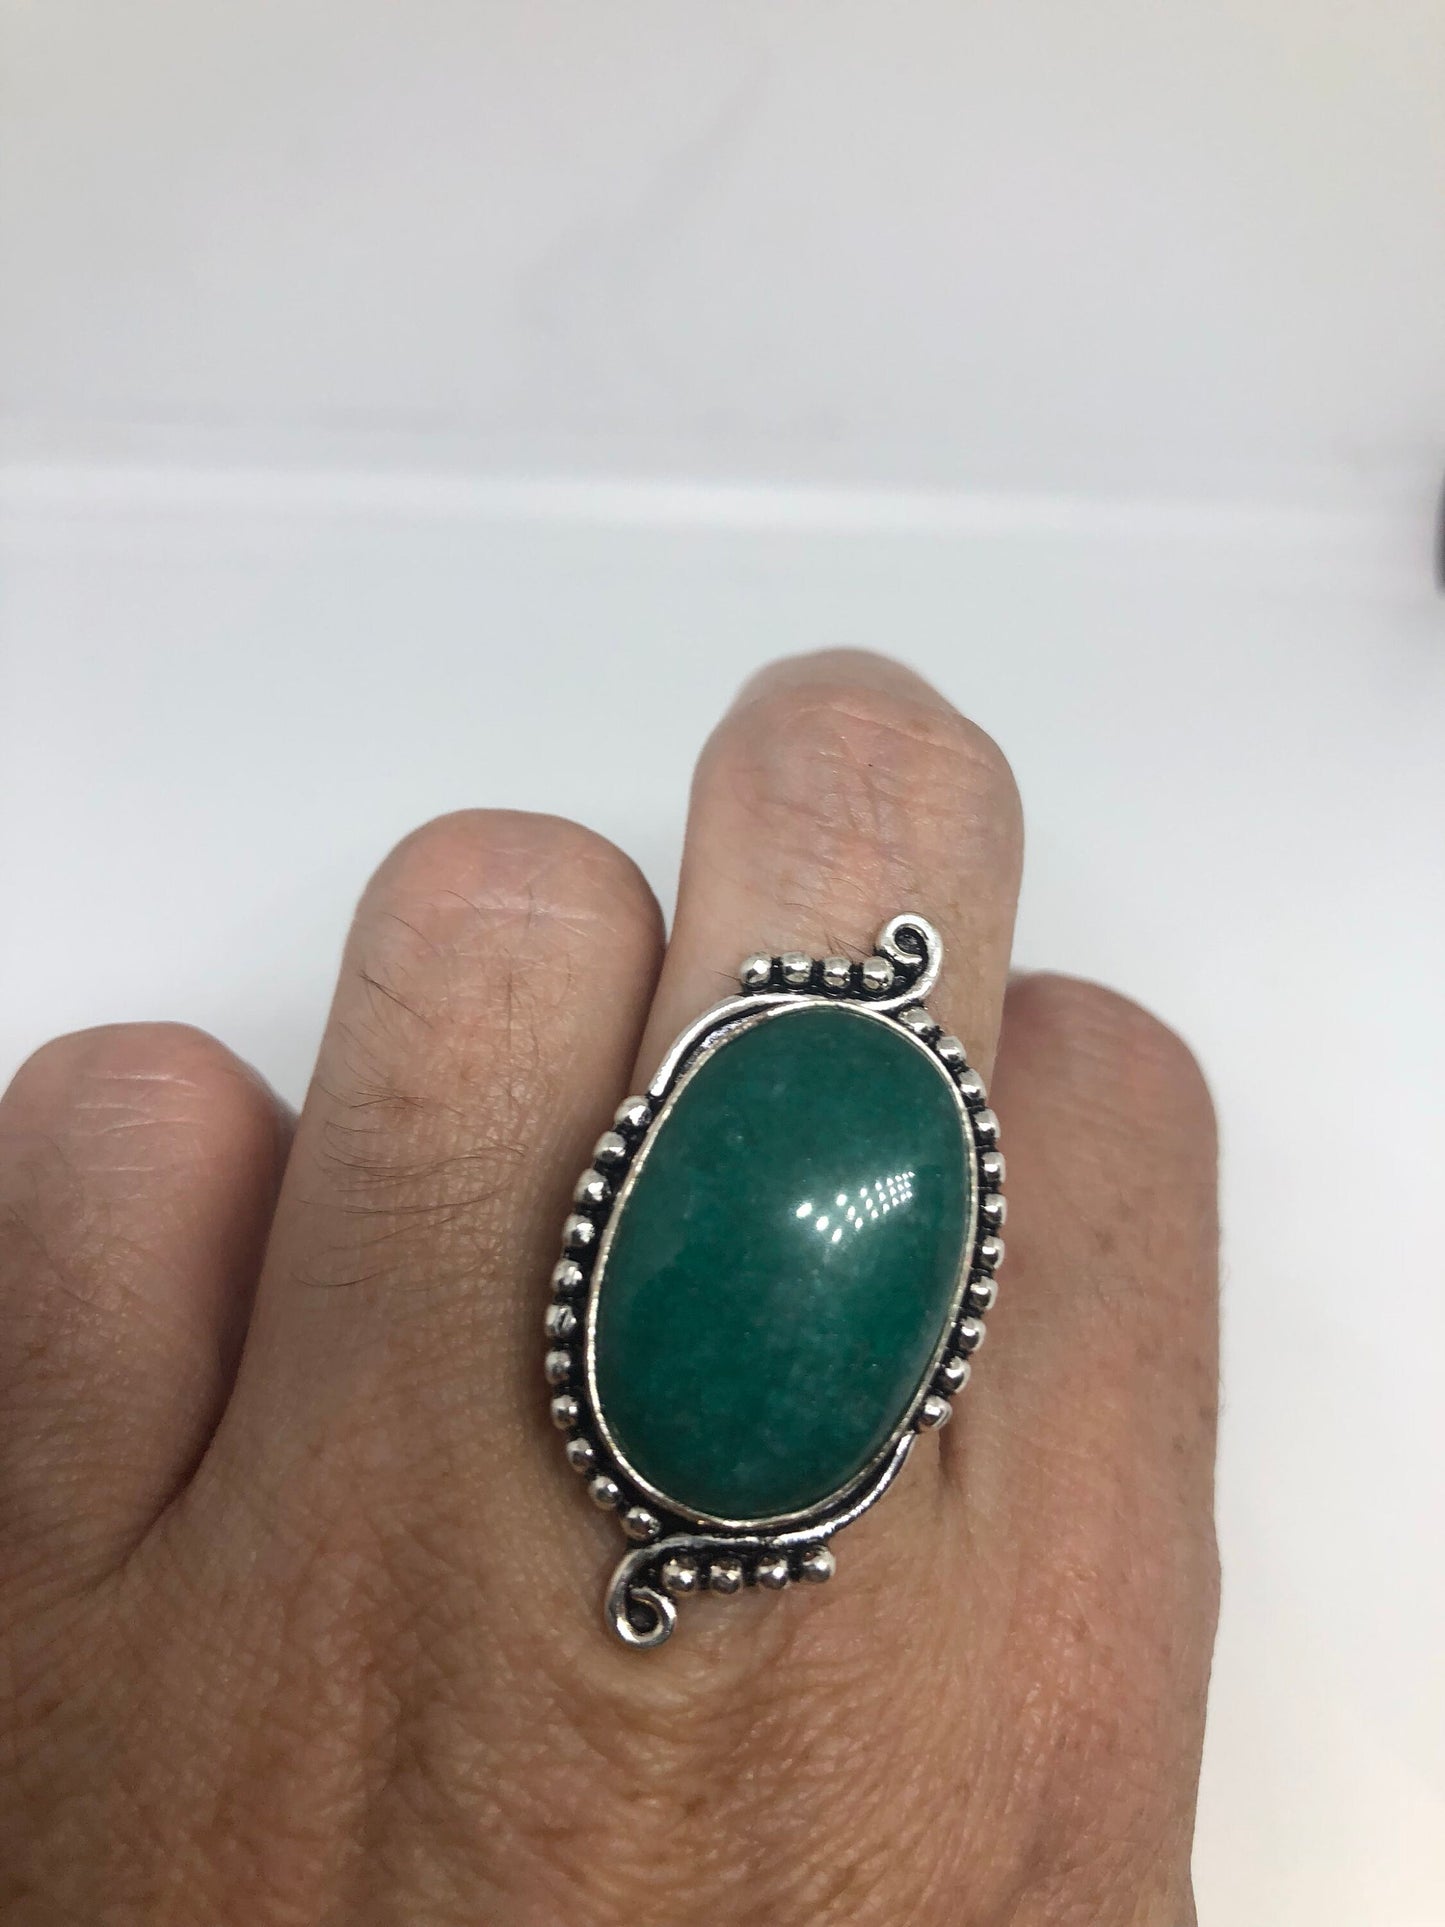 Vintage Green Nephrite Jade Ring About an Inch Long Knuckle Ring